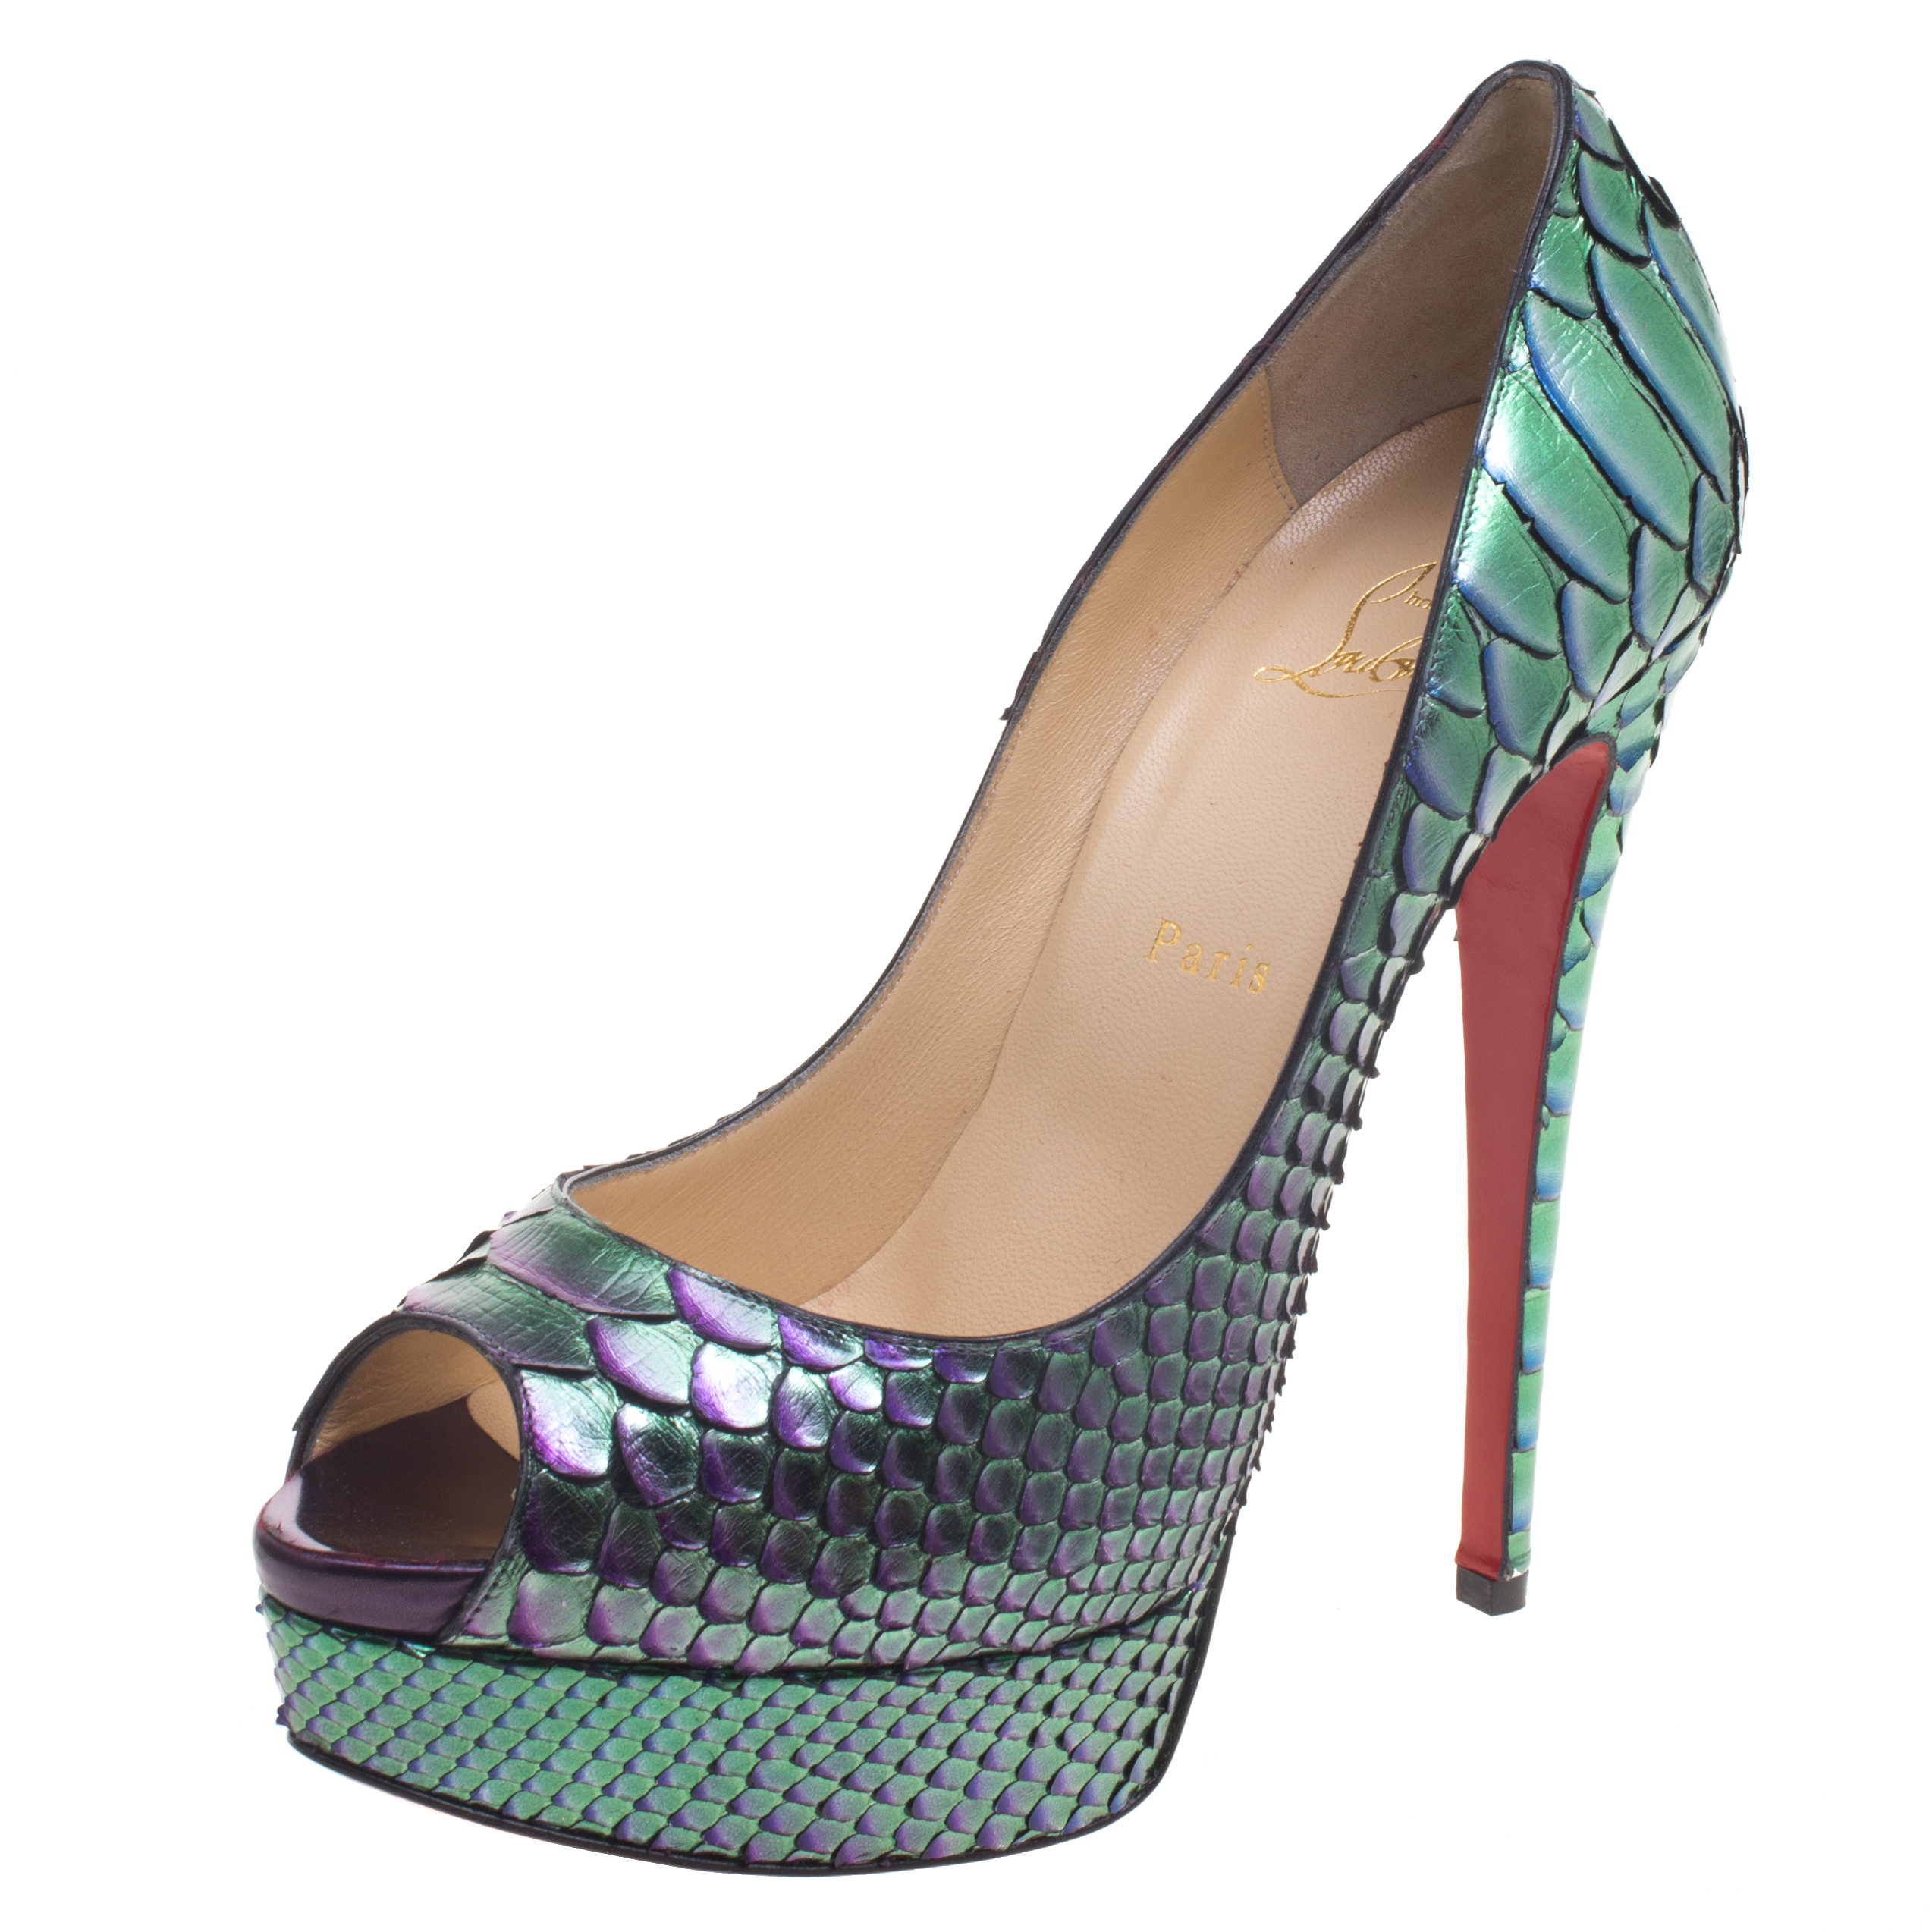 Best Lady Peep shoes by Christian Louboutin